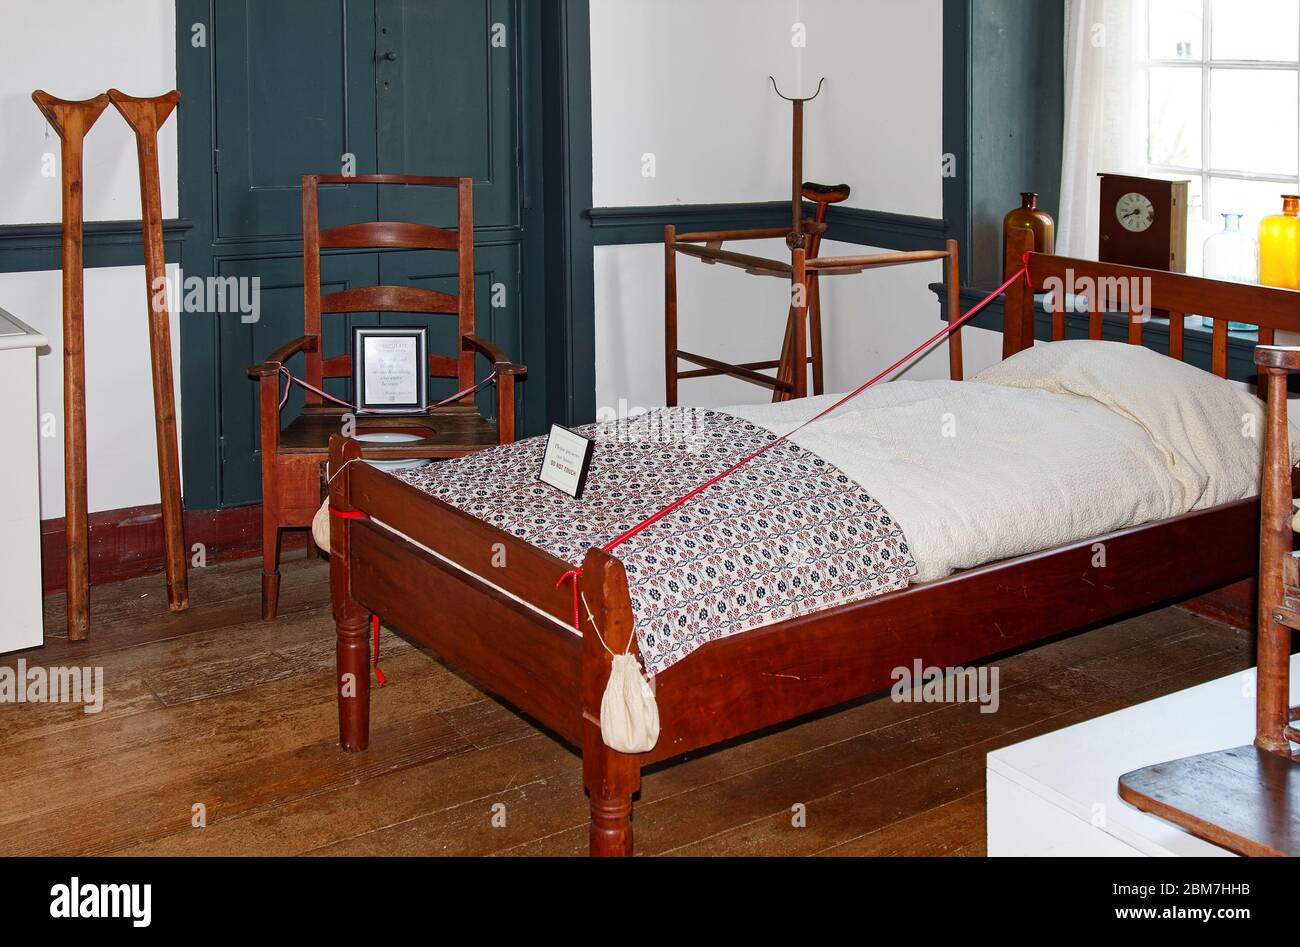 Shaker resident's bedroom, plain wood furniture, single bed, commode, crutches, walker, antiques, sick room, unadorned walls, Shaker Village of Pleasa Stock Photo